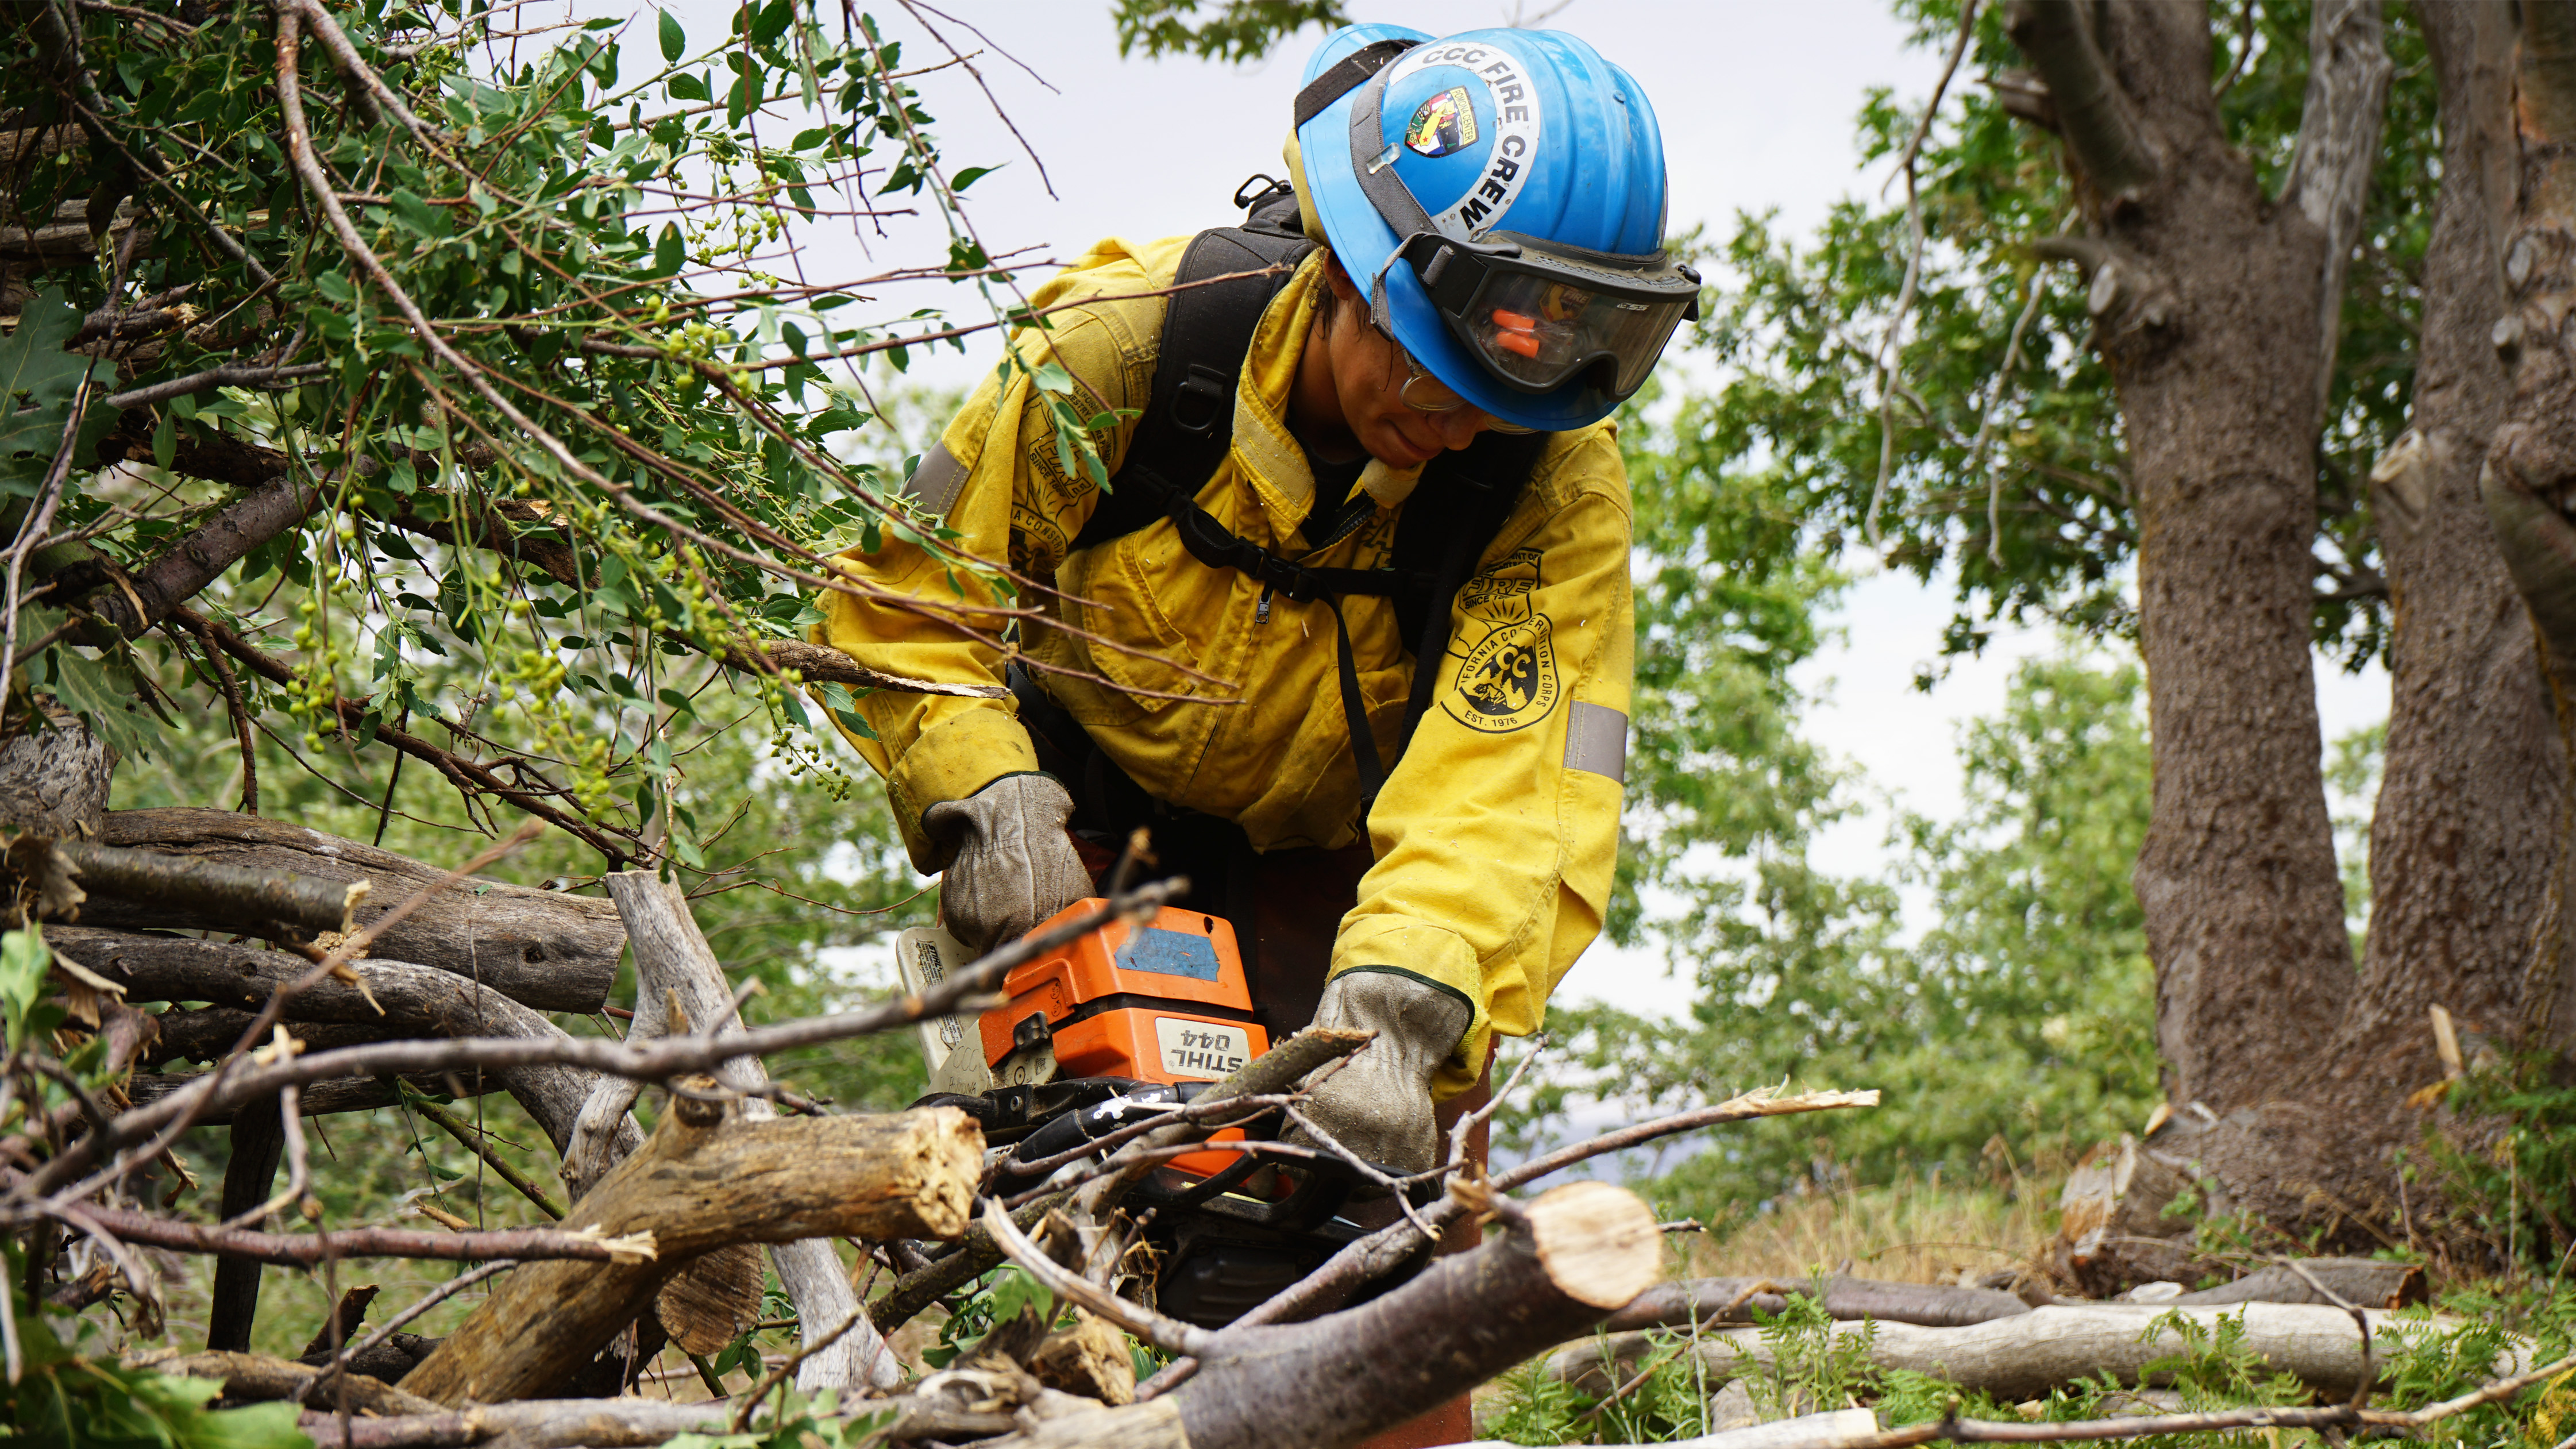 woman in fire gear using chain saw to cut branches